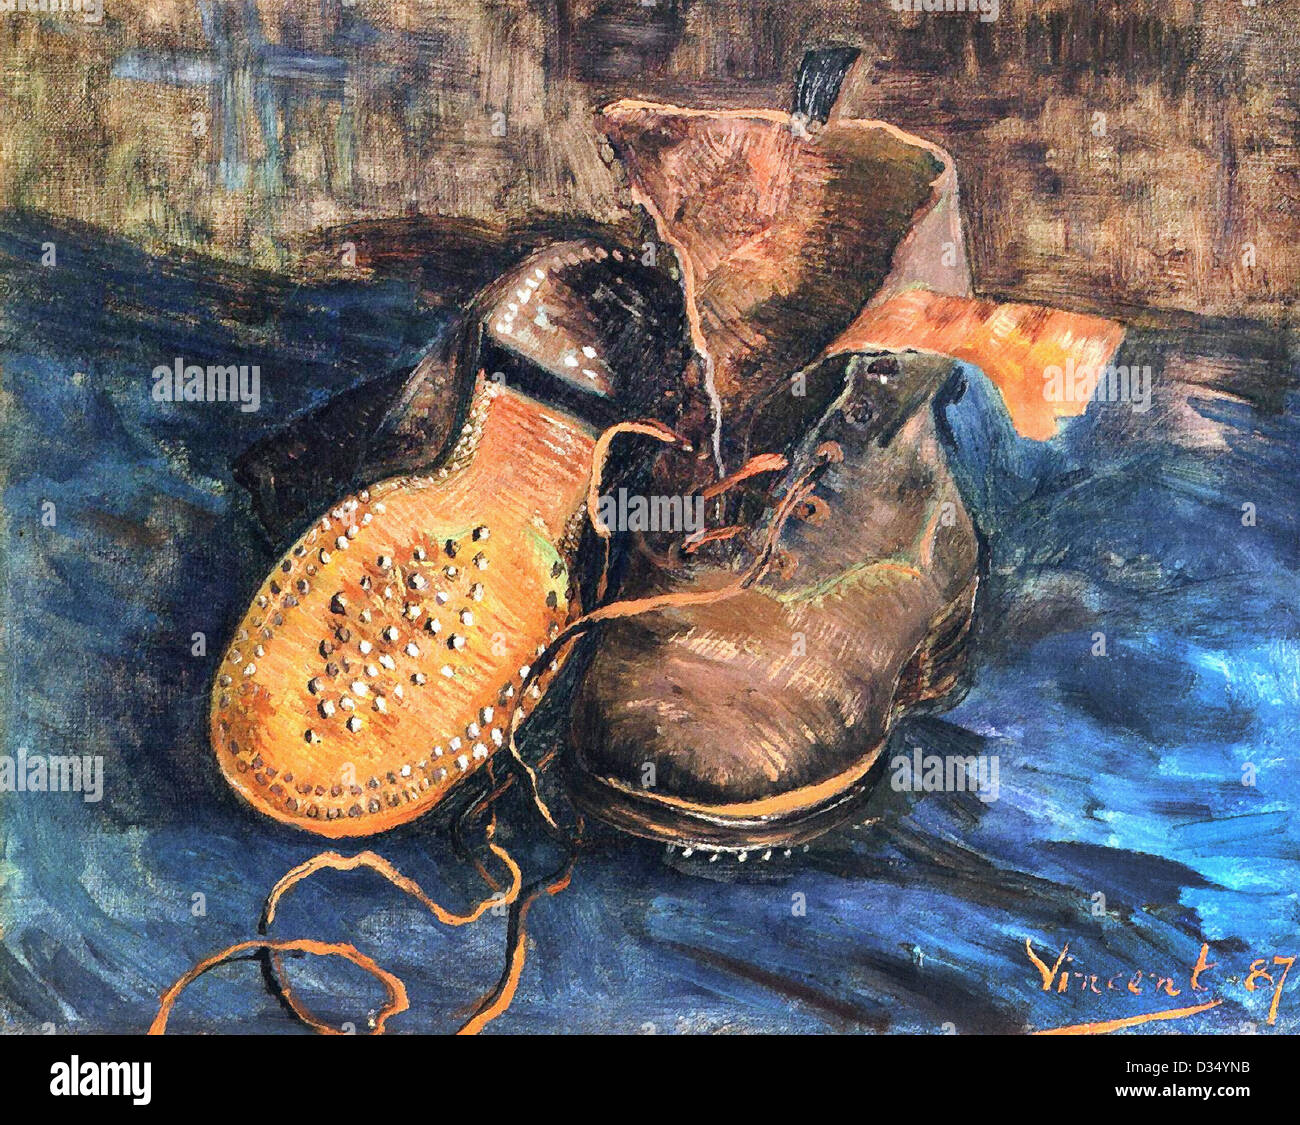 Vincent van Gogh, A Pair of Shoes. 1887. Post-Impressionism. Oil on canvas.  Baltimore Museum of Art, Baltimore, MD, USA Stock Photo - Alamy